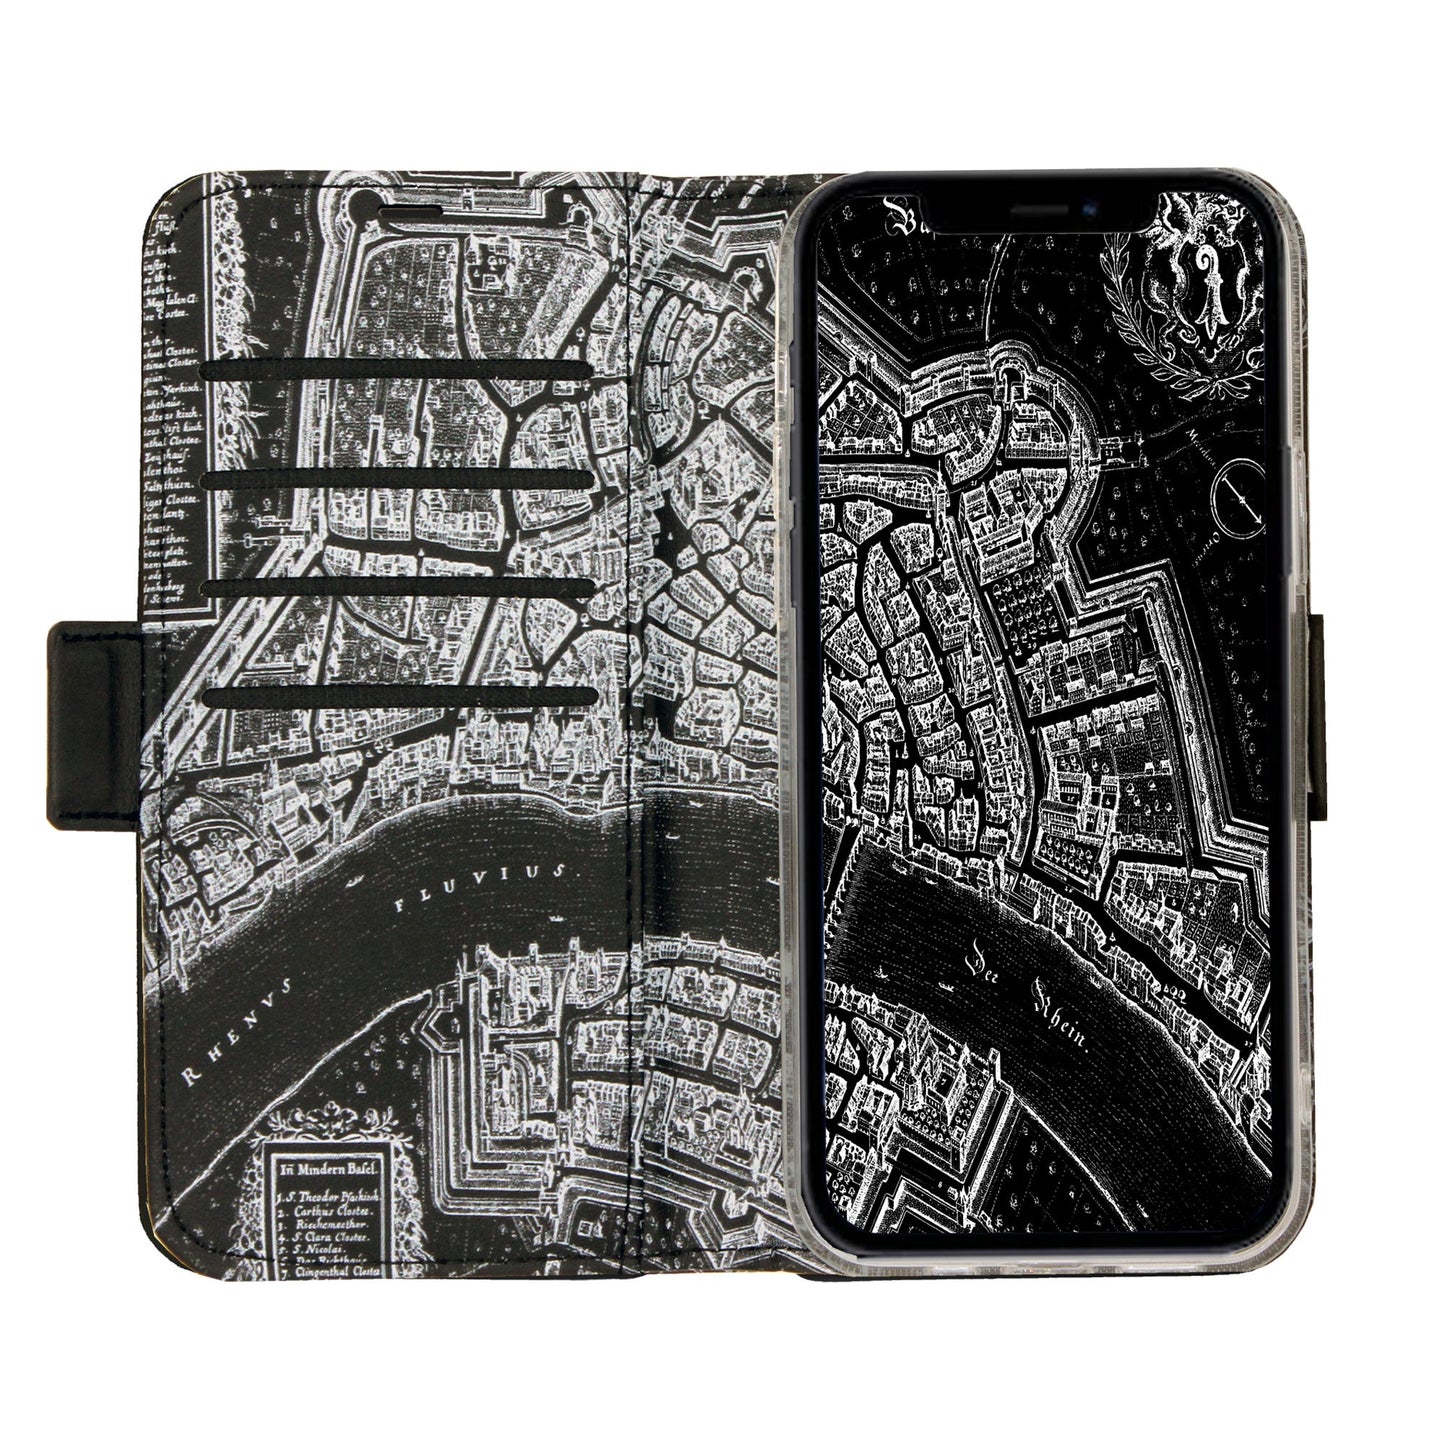 Basel City Spalentor Victor Case for iPhone 12/12 Pro